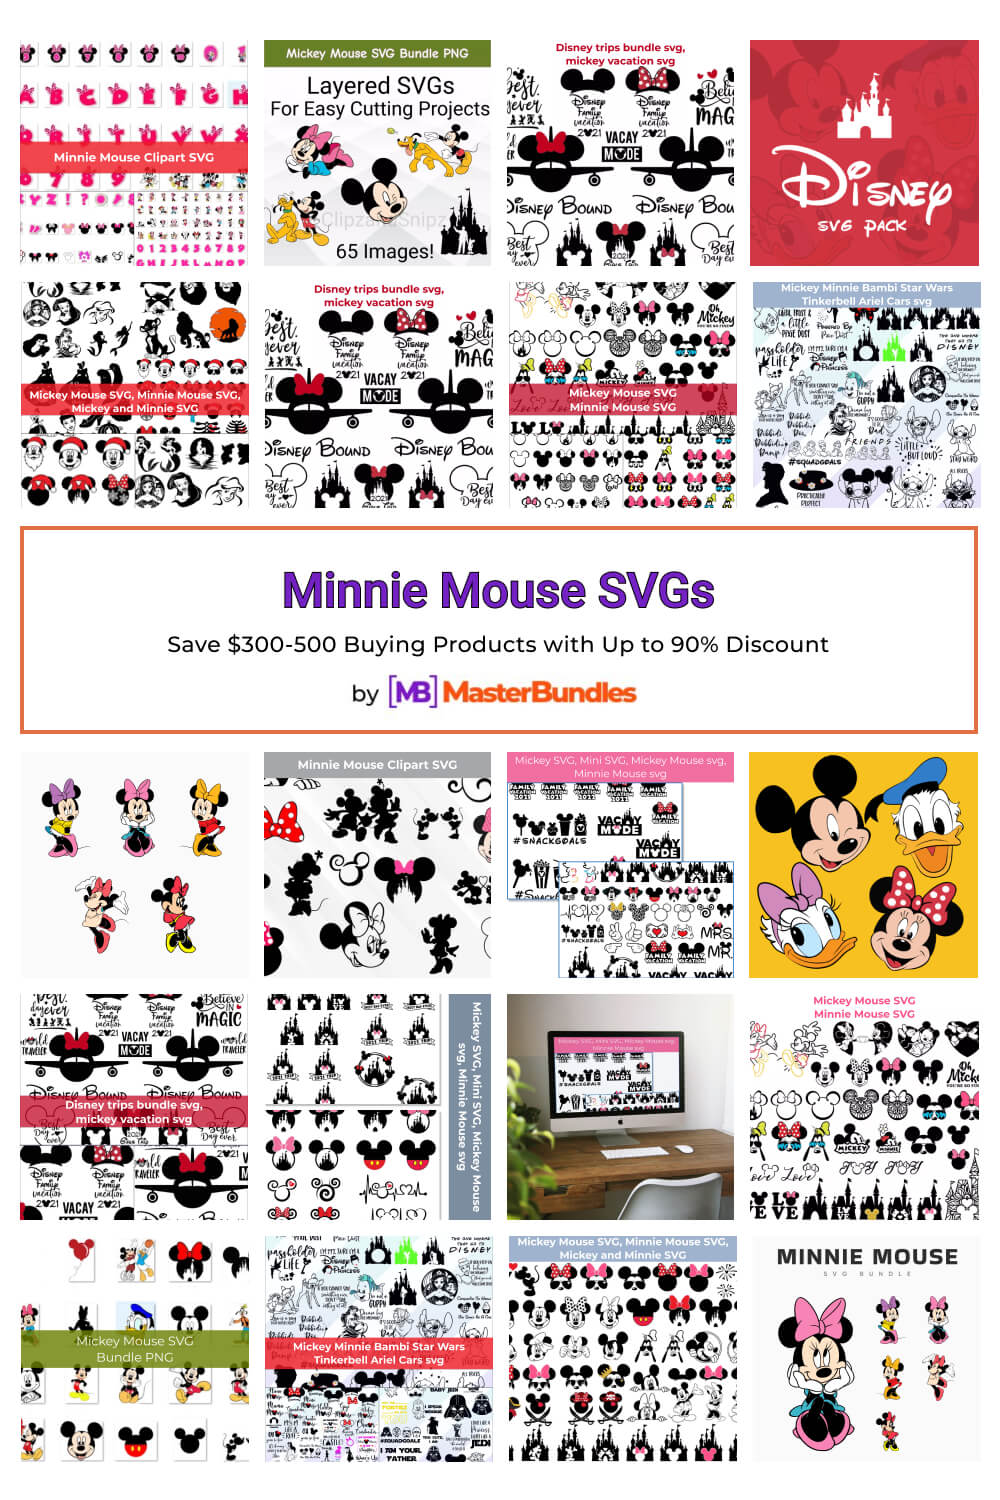 minnie mouse svgs pinterest image.